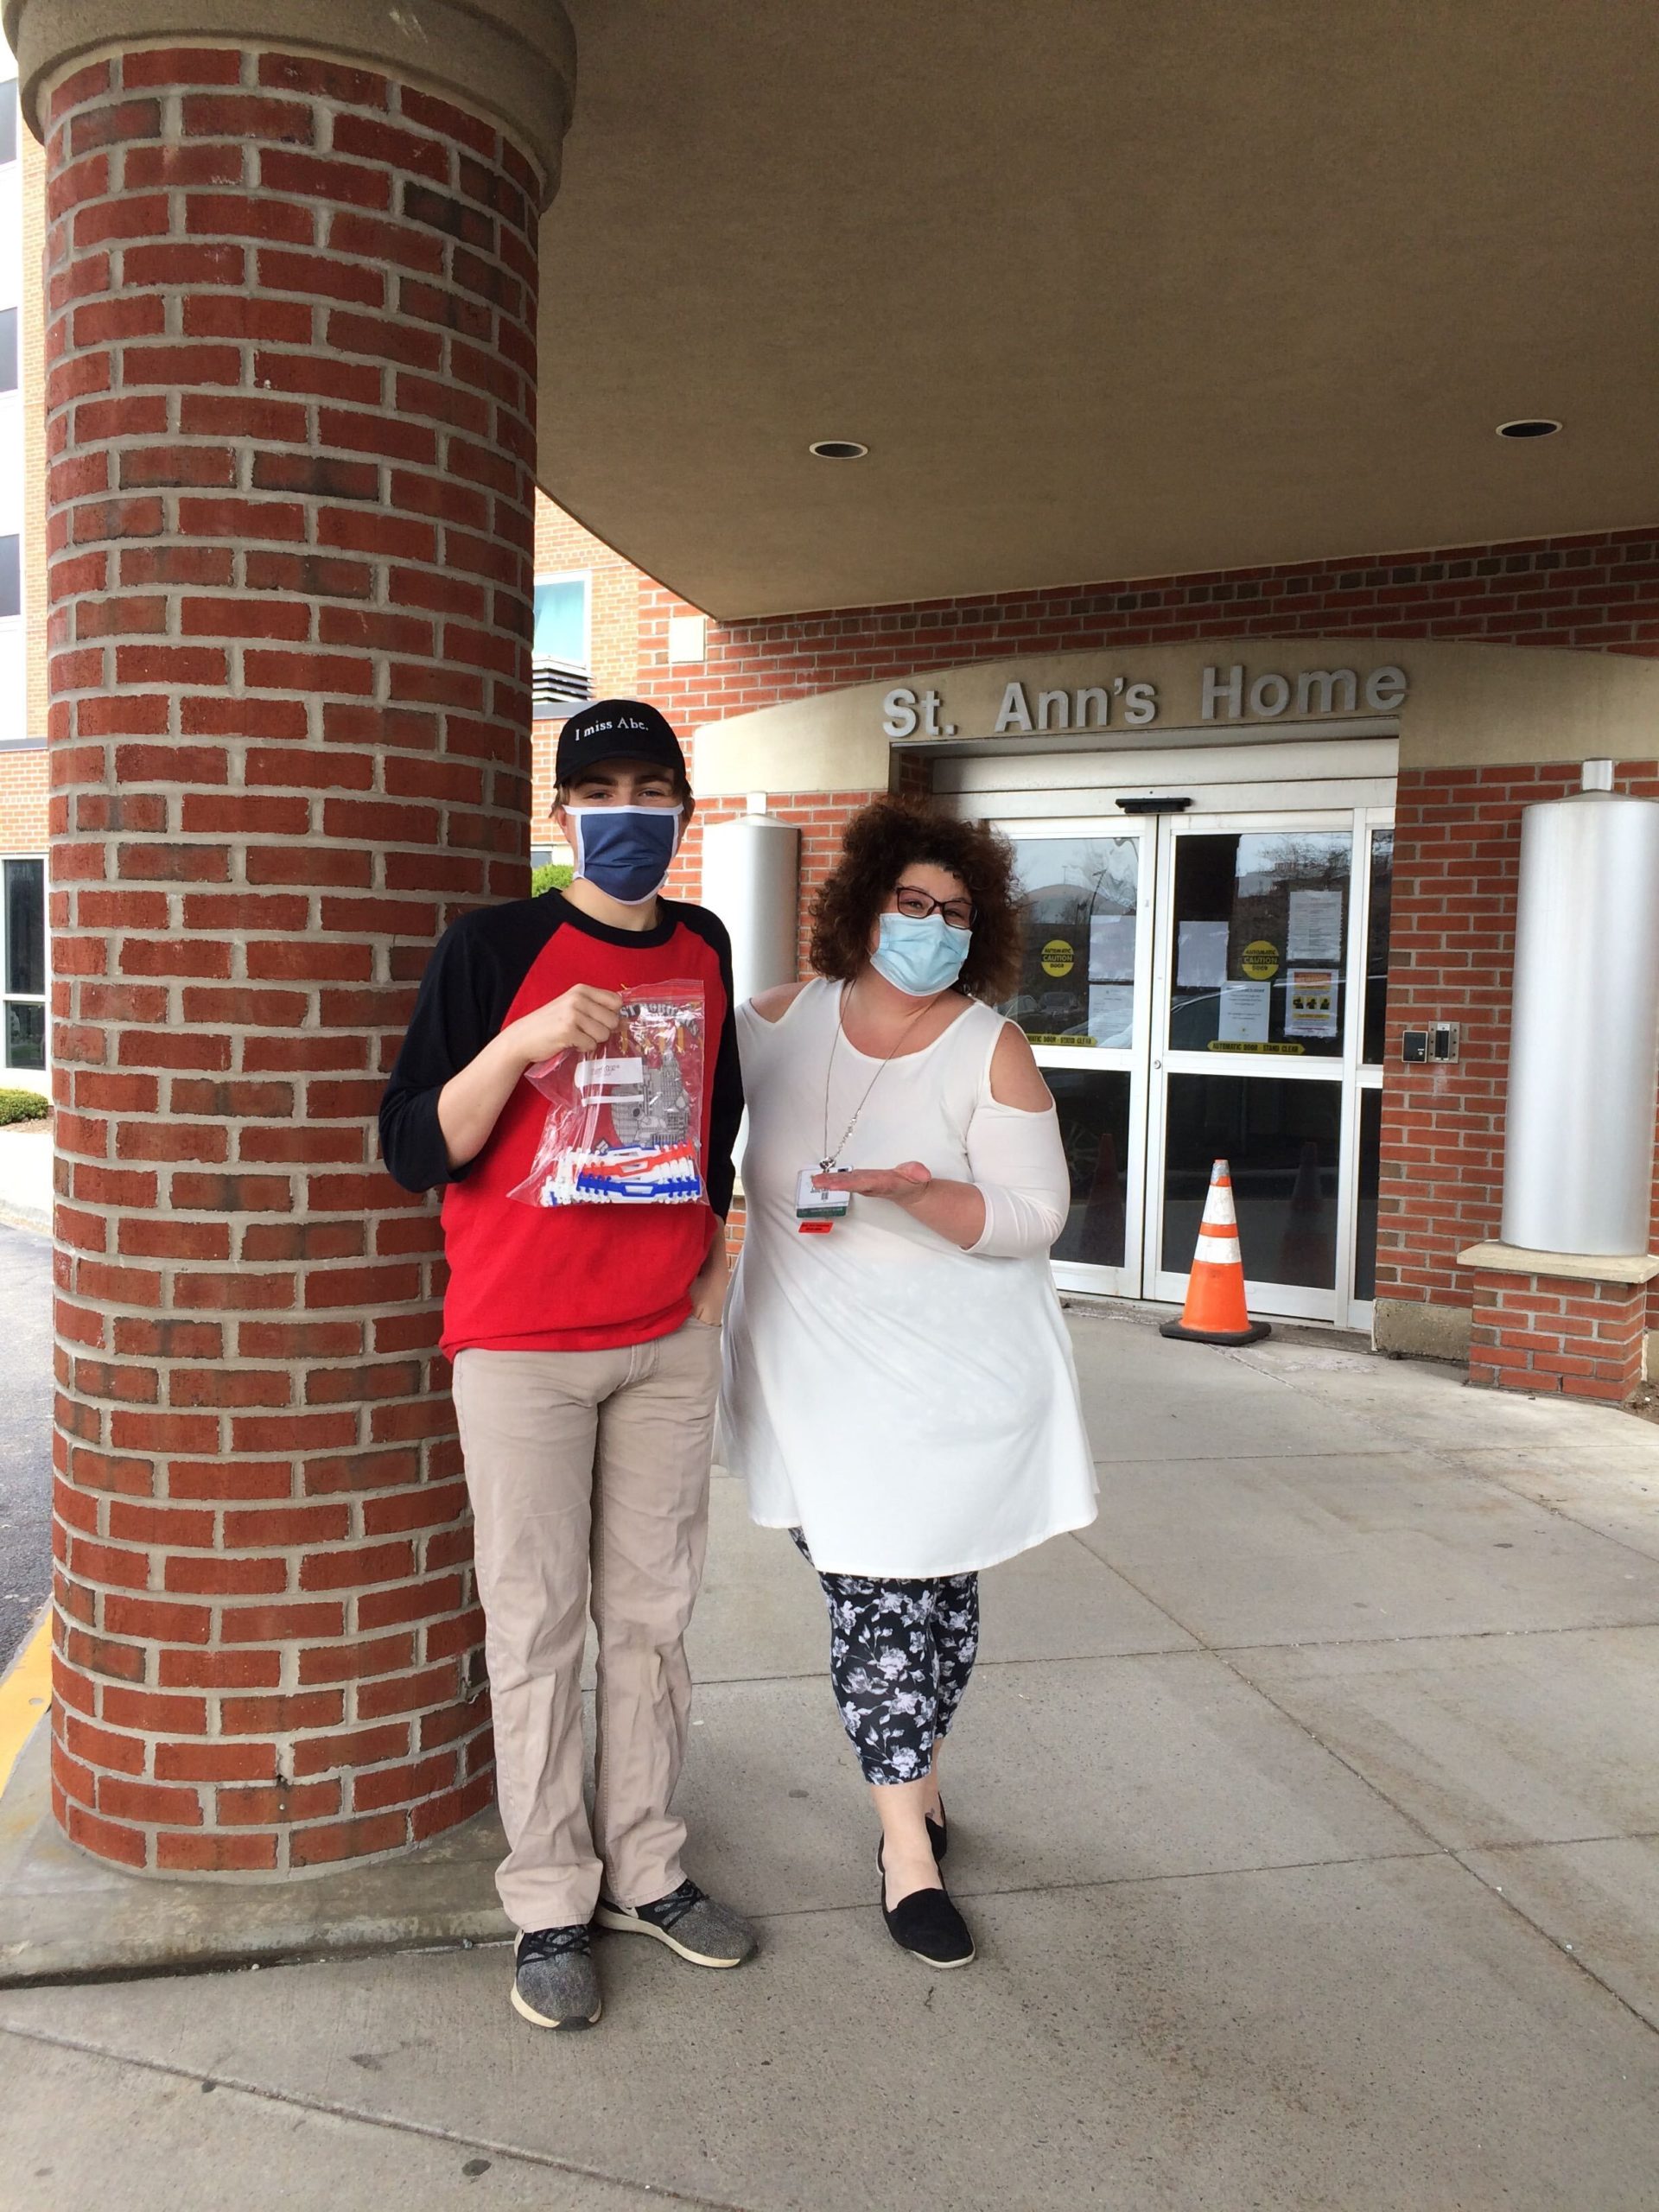 Team member dropping off surgical mask straps at St. Anne's Home